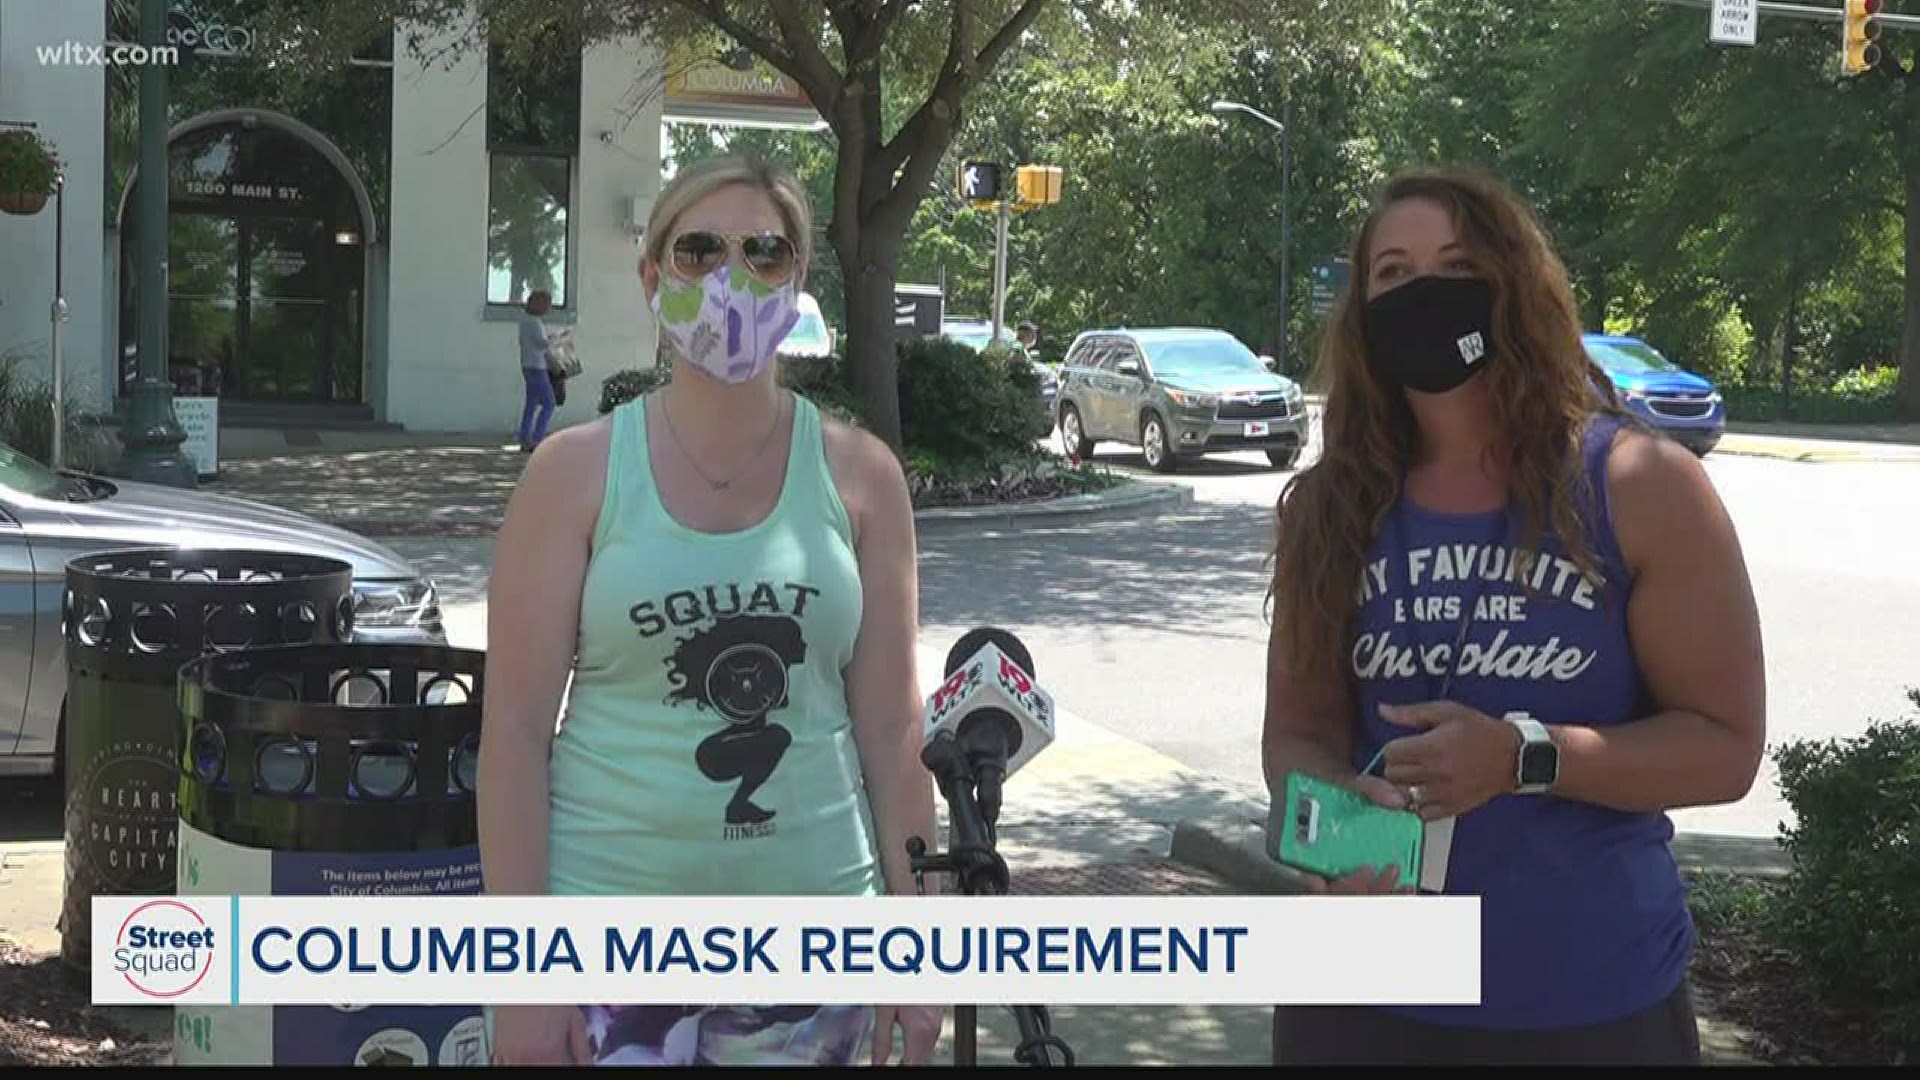 The city council voted to make wearing masks in the city limits of Columbia mandatory